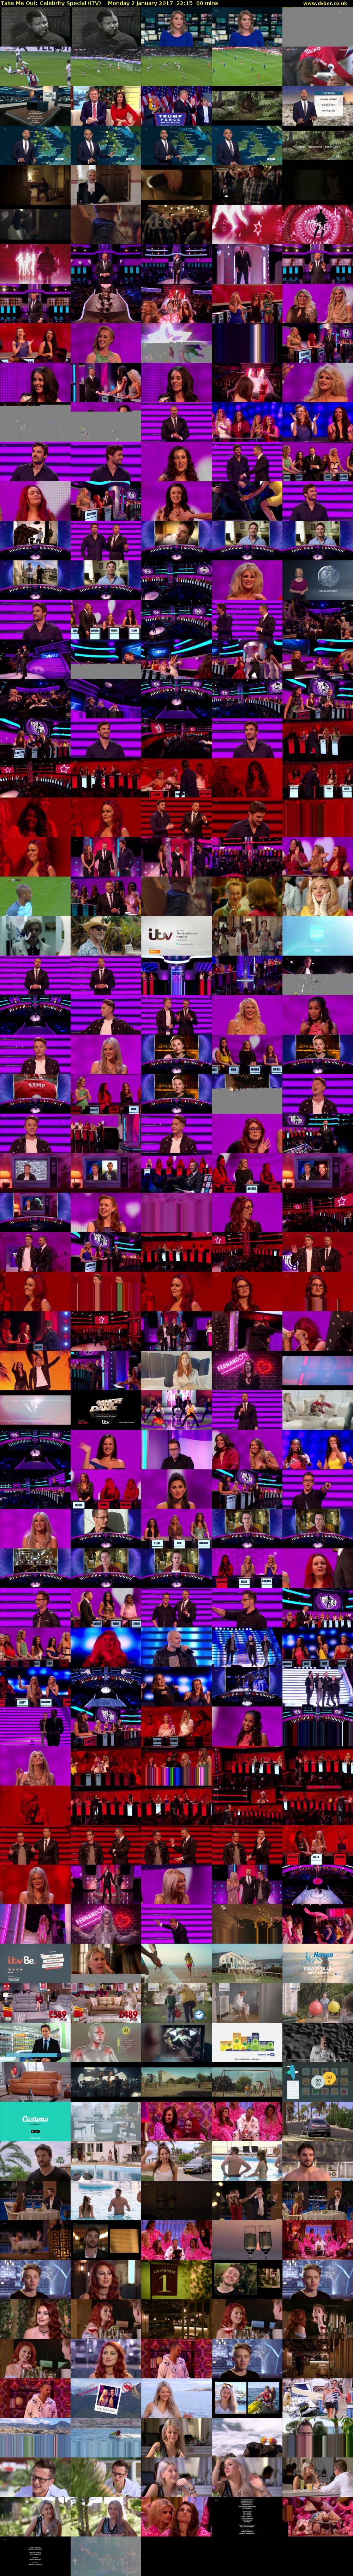 Take Me Out: Celebrity Special (ITV) Monday 2 January 2017 22:15 - 23:15